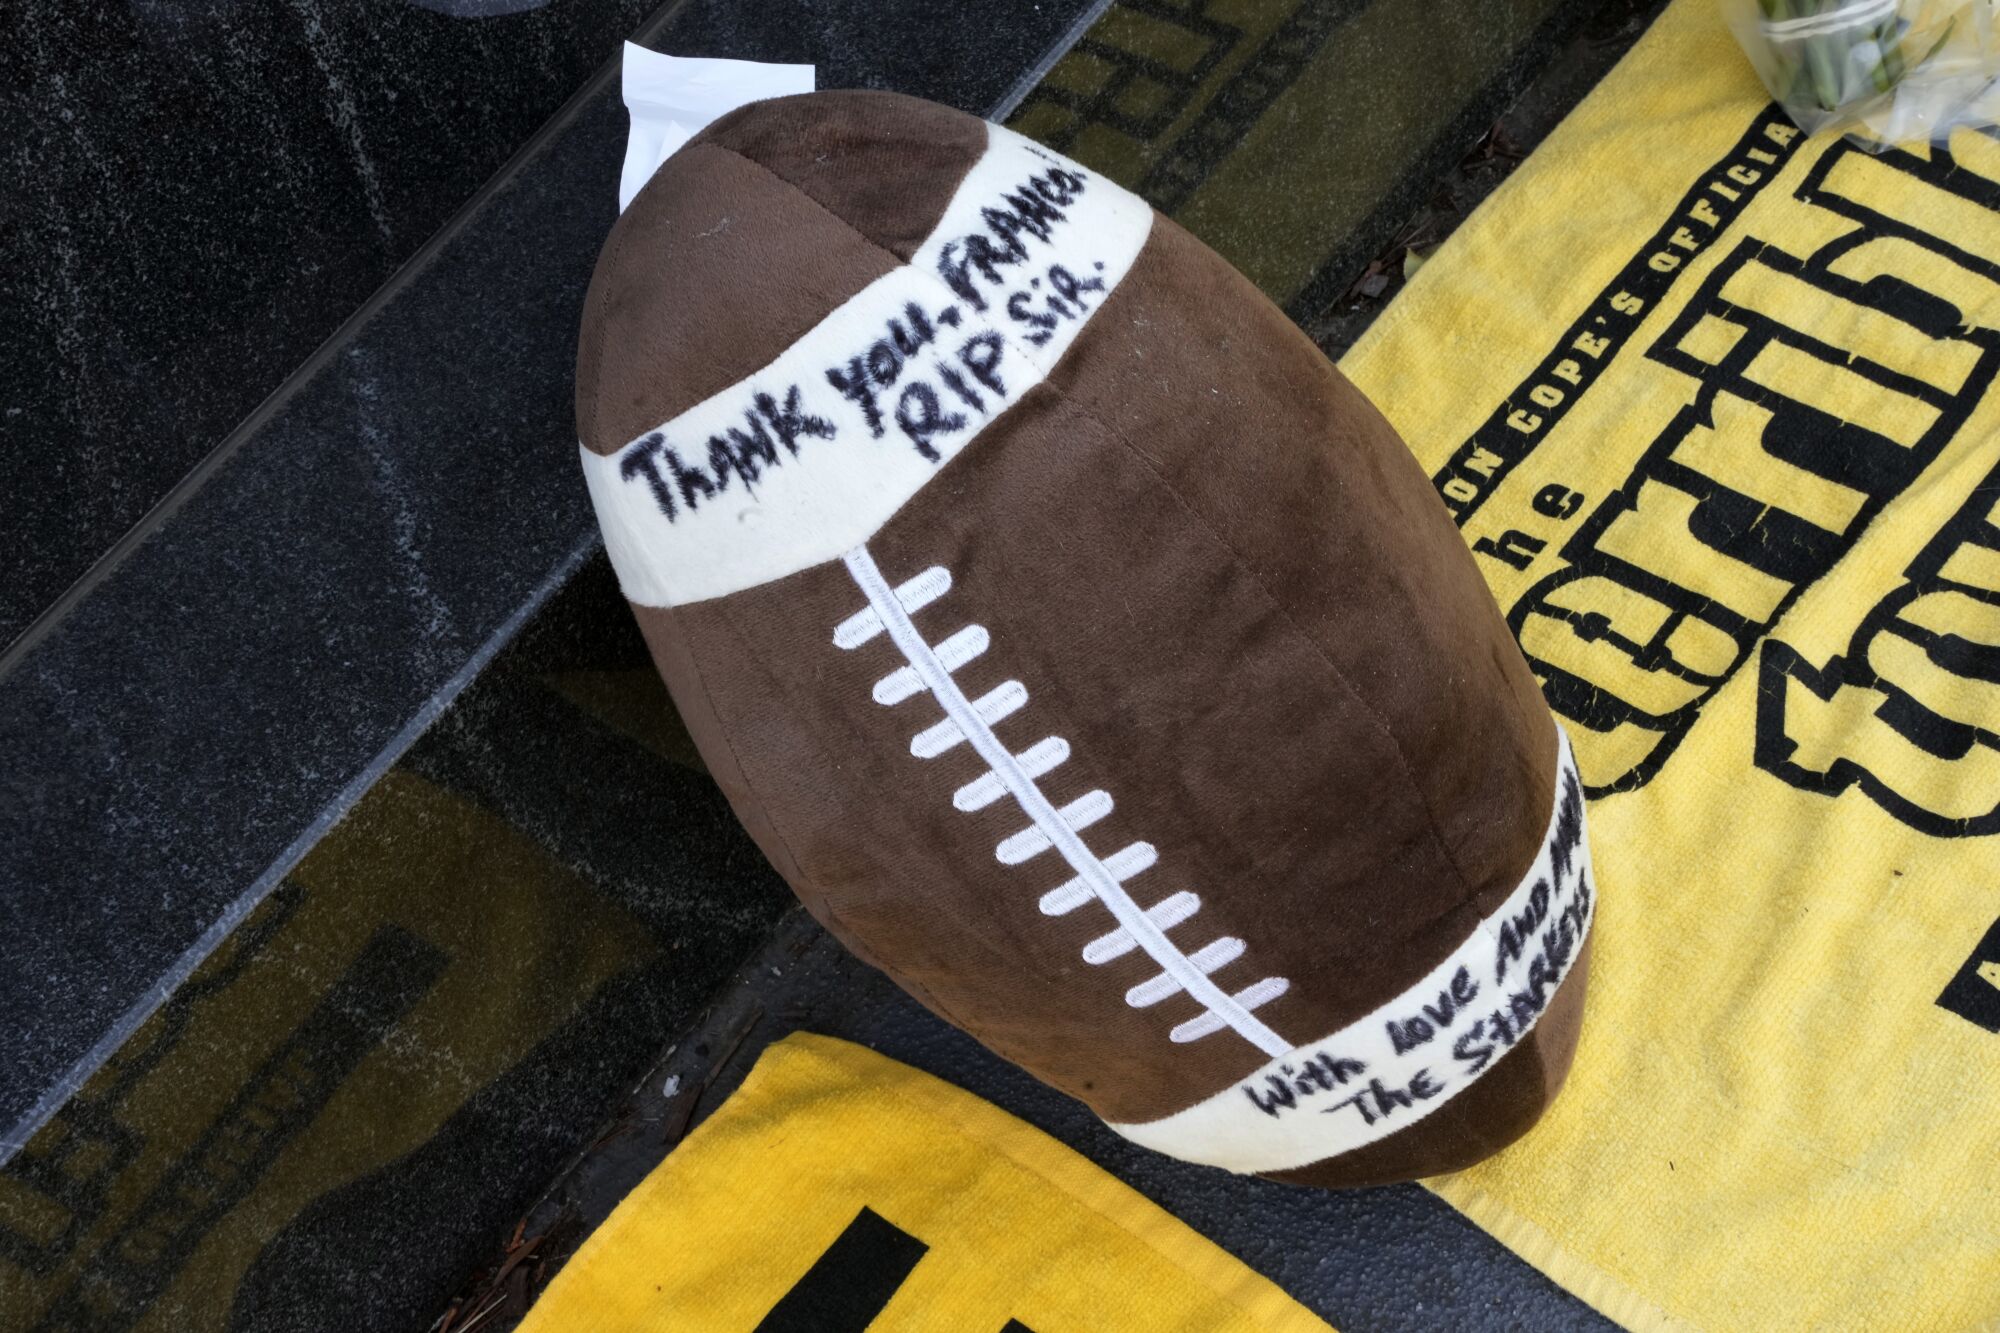 A stuffed football is placed at the Immaculate Reception memorial outside Acrisure Stadium in Pittsburgh 